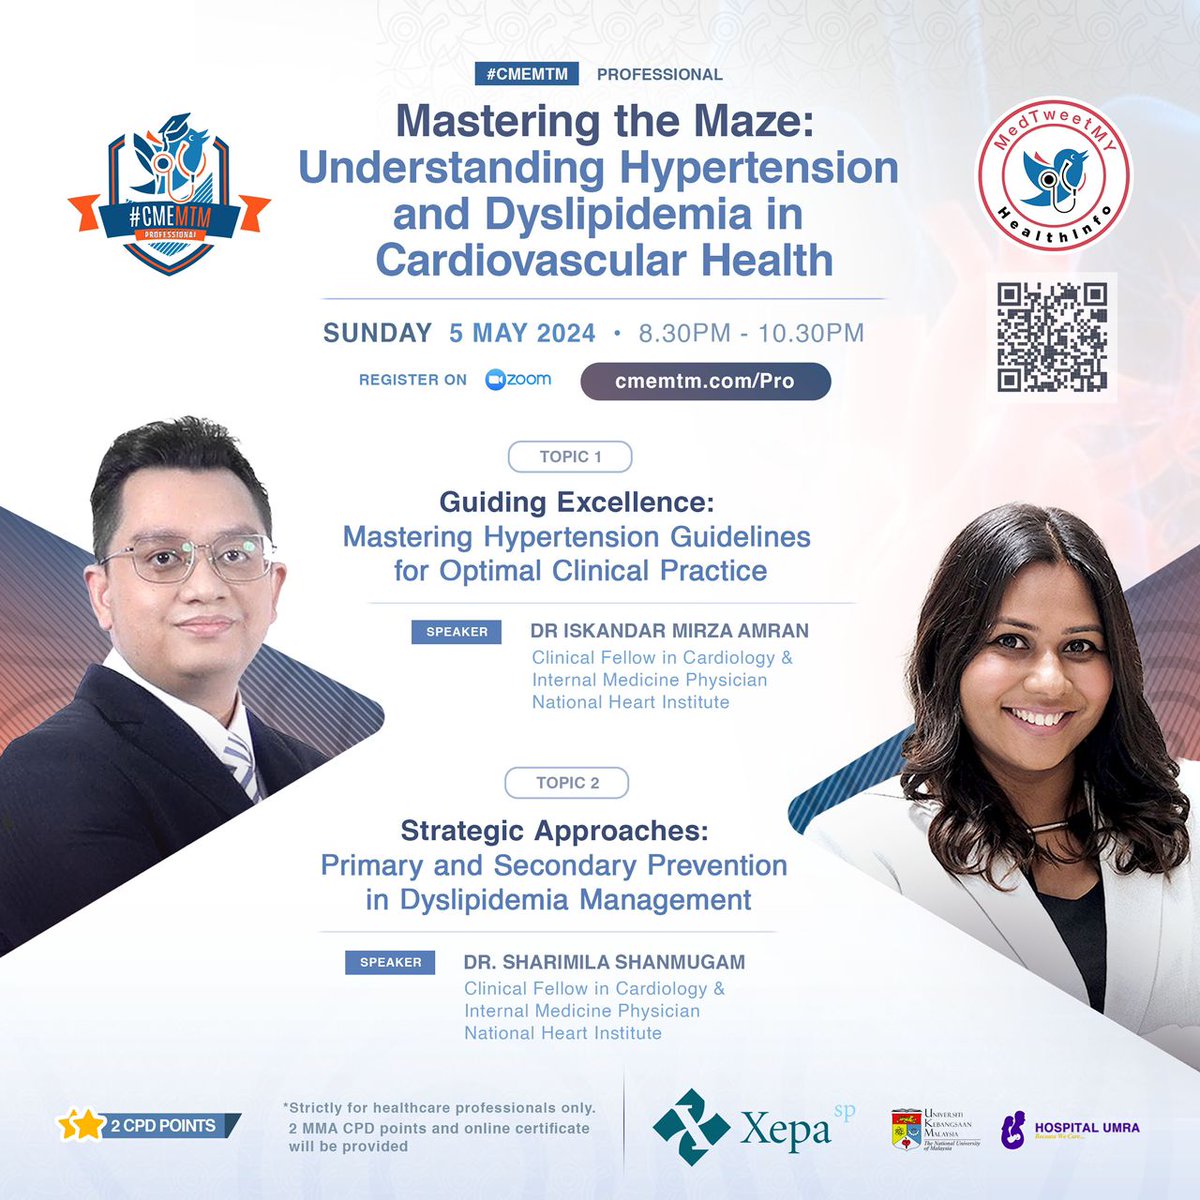 Our organisation is pleased to announce a webinar session scheduled for next Sunday night, May 5, 2024, from 8:30 PM to 10:30 PM. The session, titled 'Mastering the Maze: Understanding Hypertension and Dyslipidemia in Cardiovascular Health,' will features two esteemed speakers.…